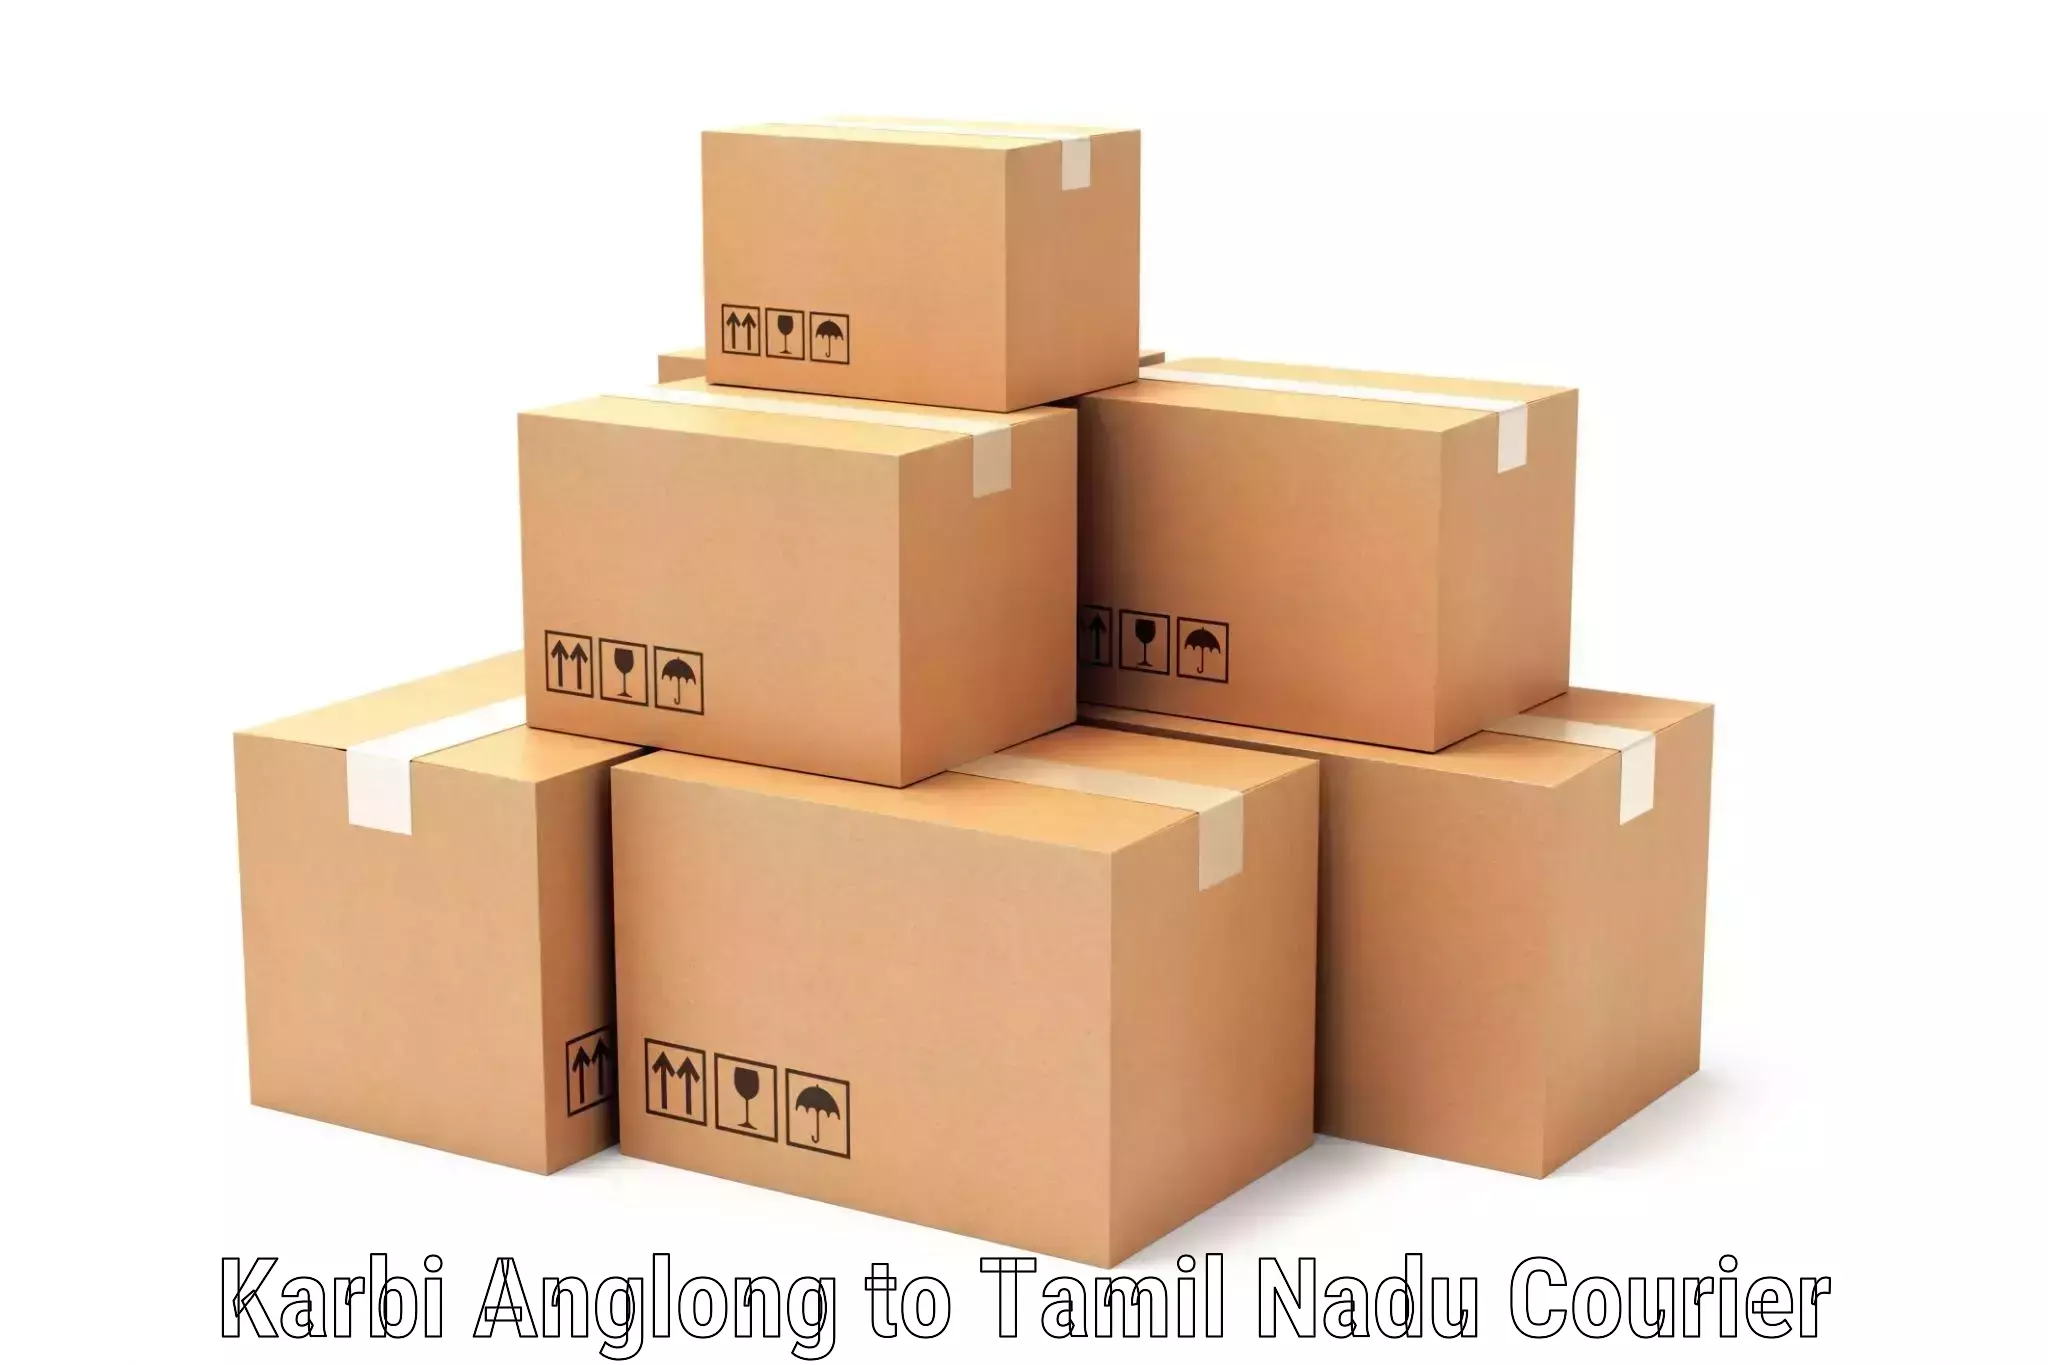 State-of-the-art courier technology Karbi Anglong to Tamil Nadu